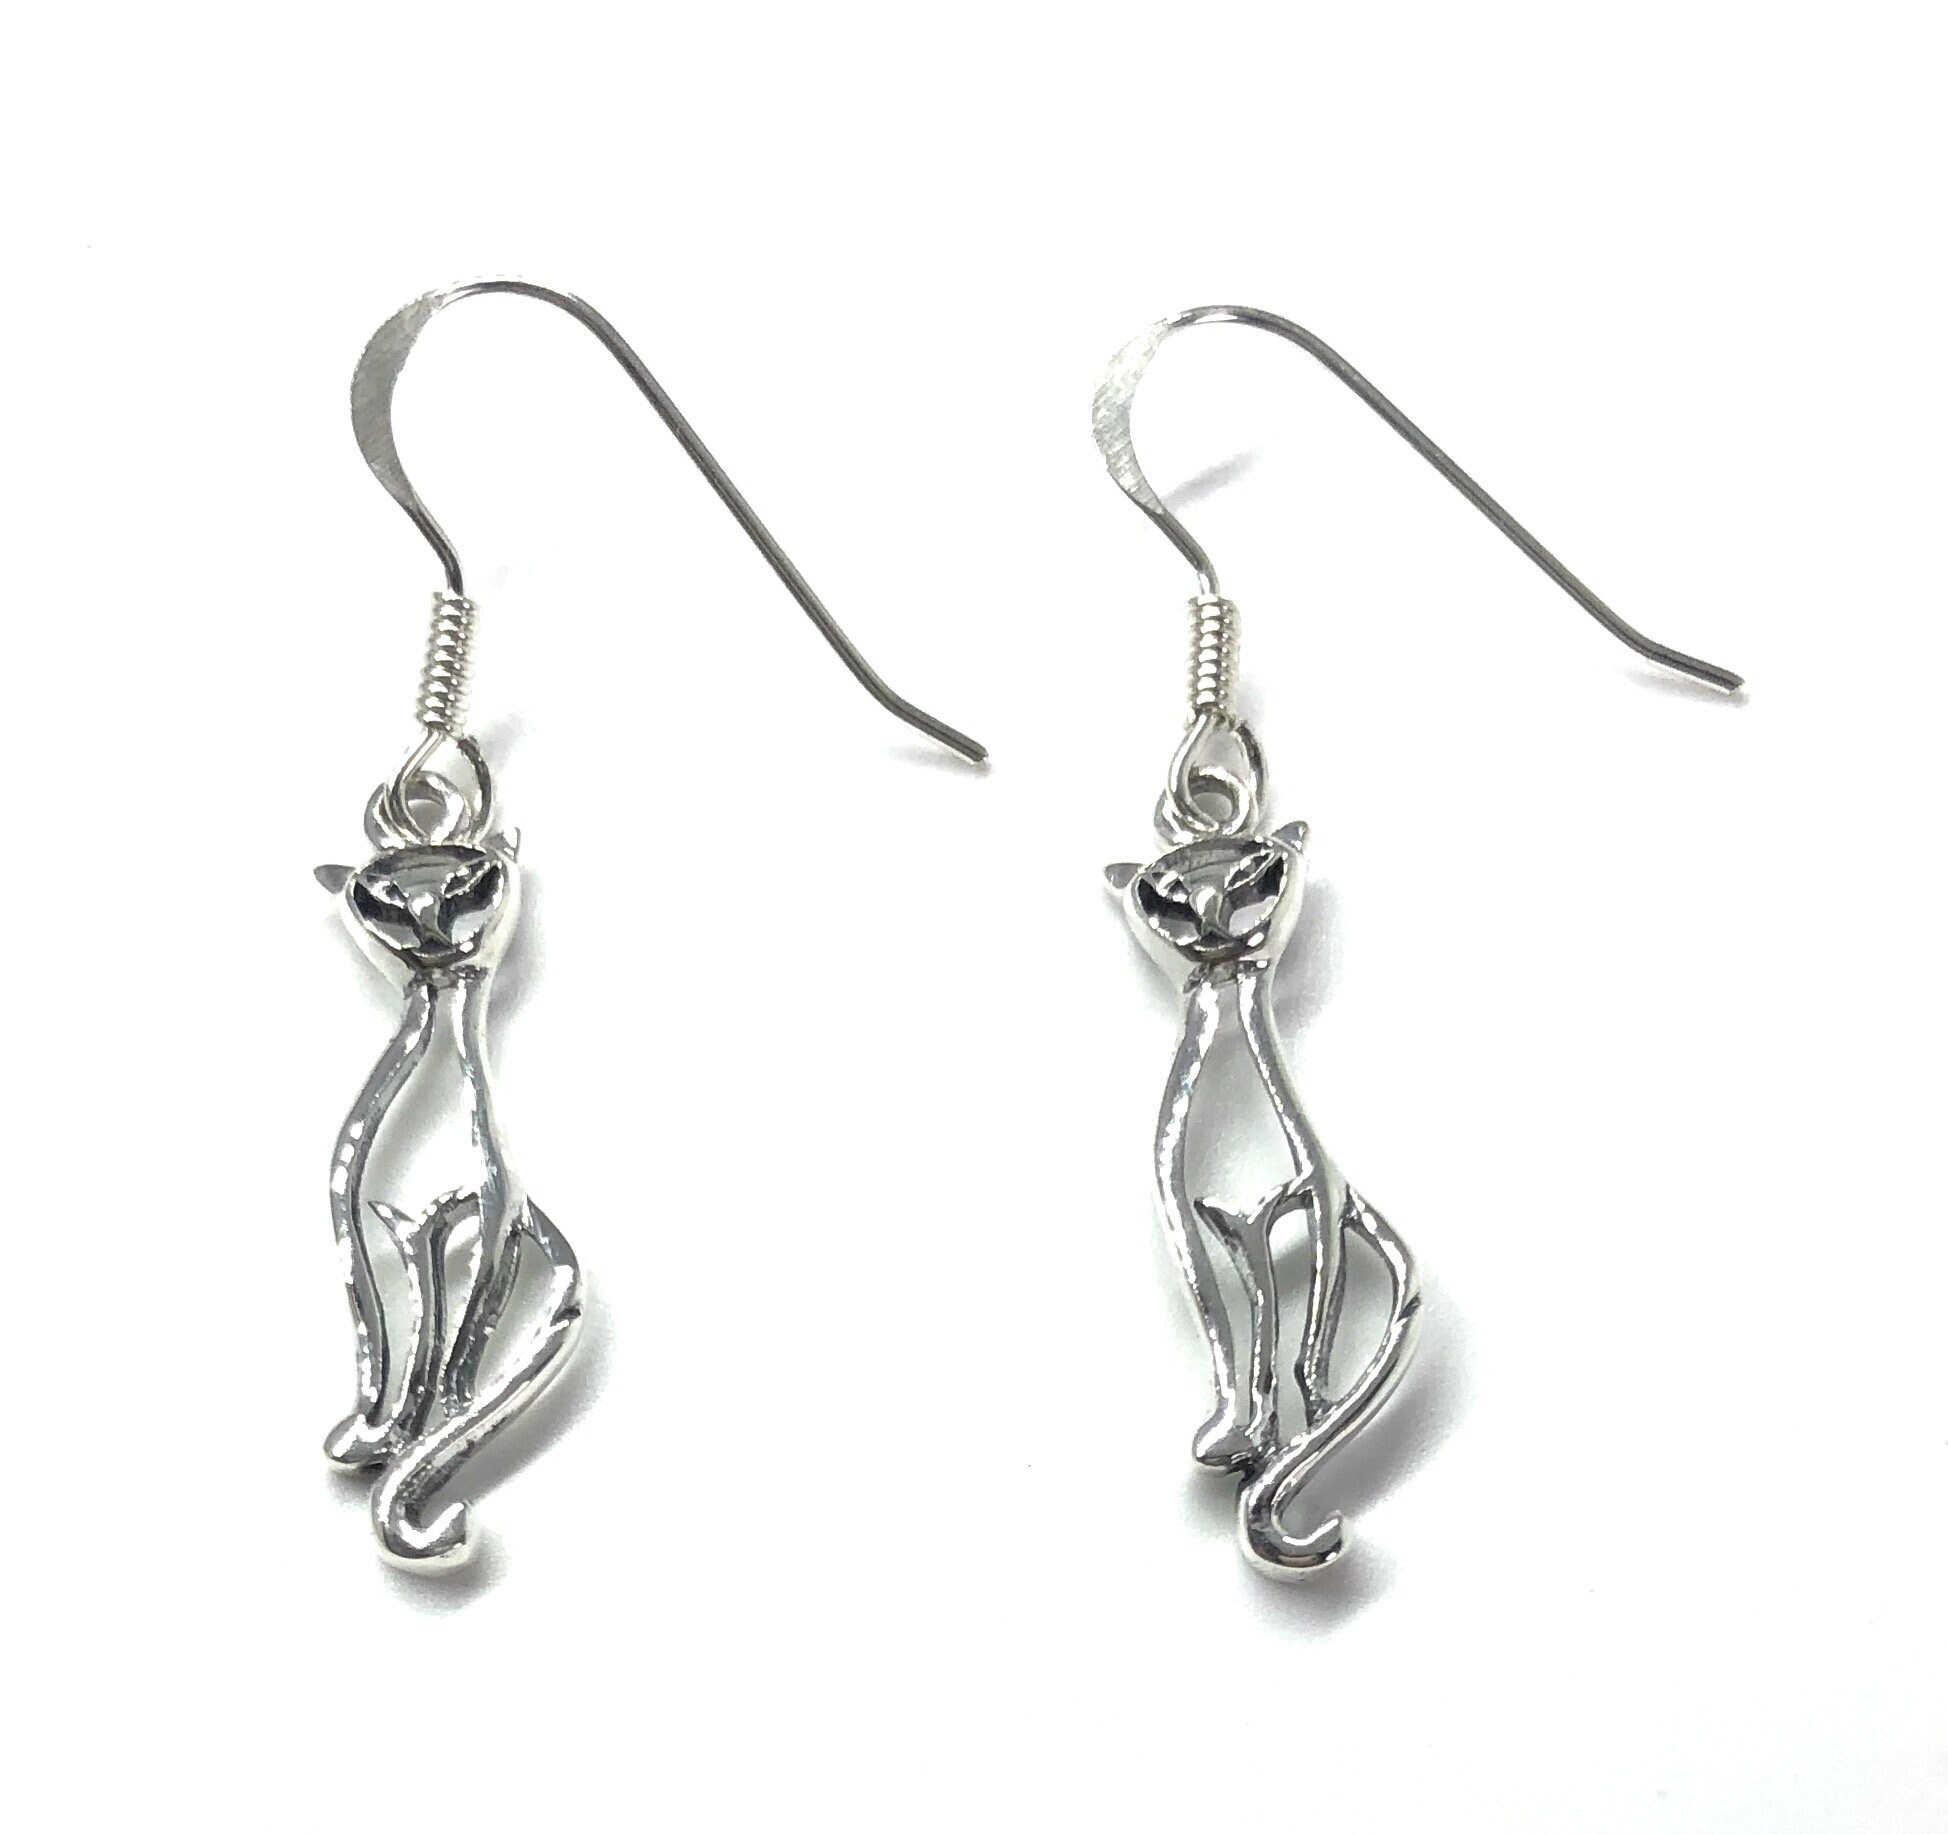 Handmade Silver Plated Cat Drop Earrings 925 Silver Wires